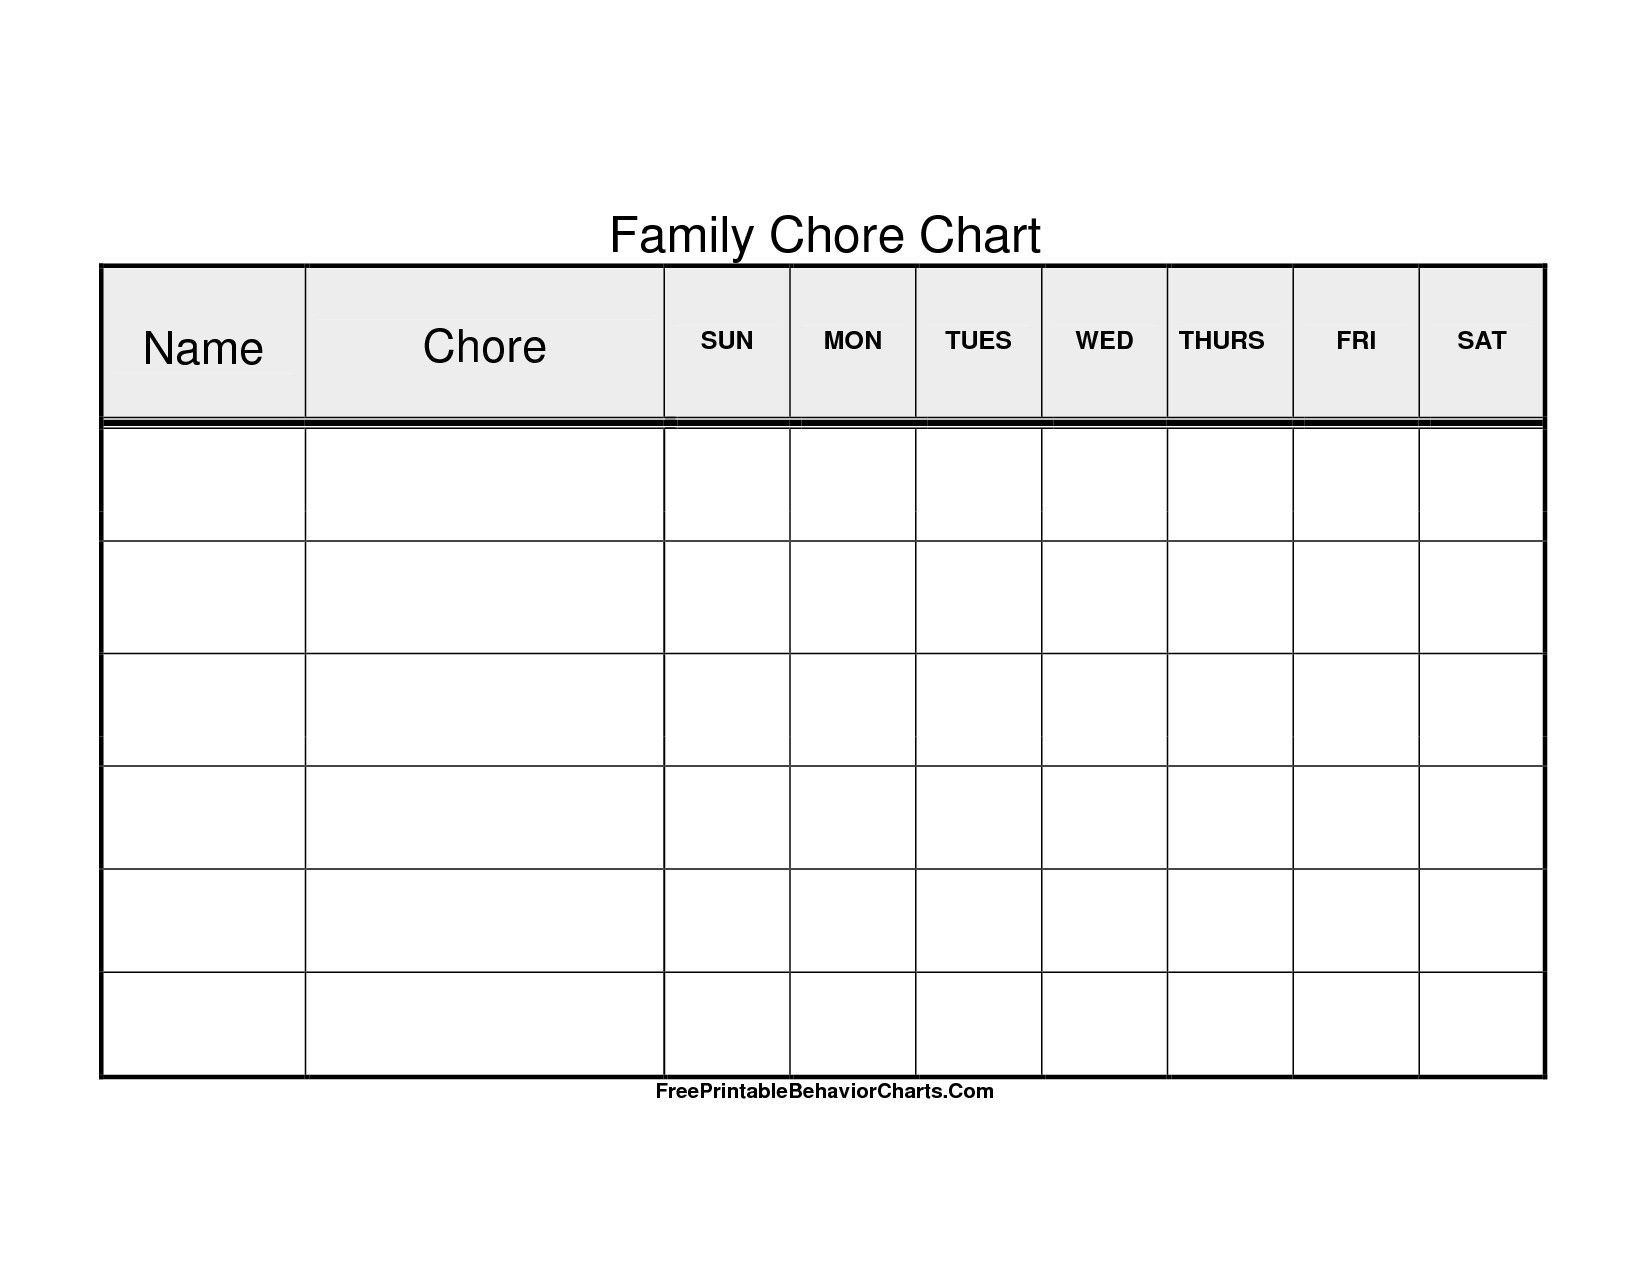 Image Result For Graft Templates For Family Chores To Print-Free Blank Charts To Print